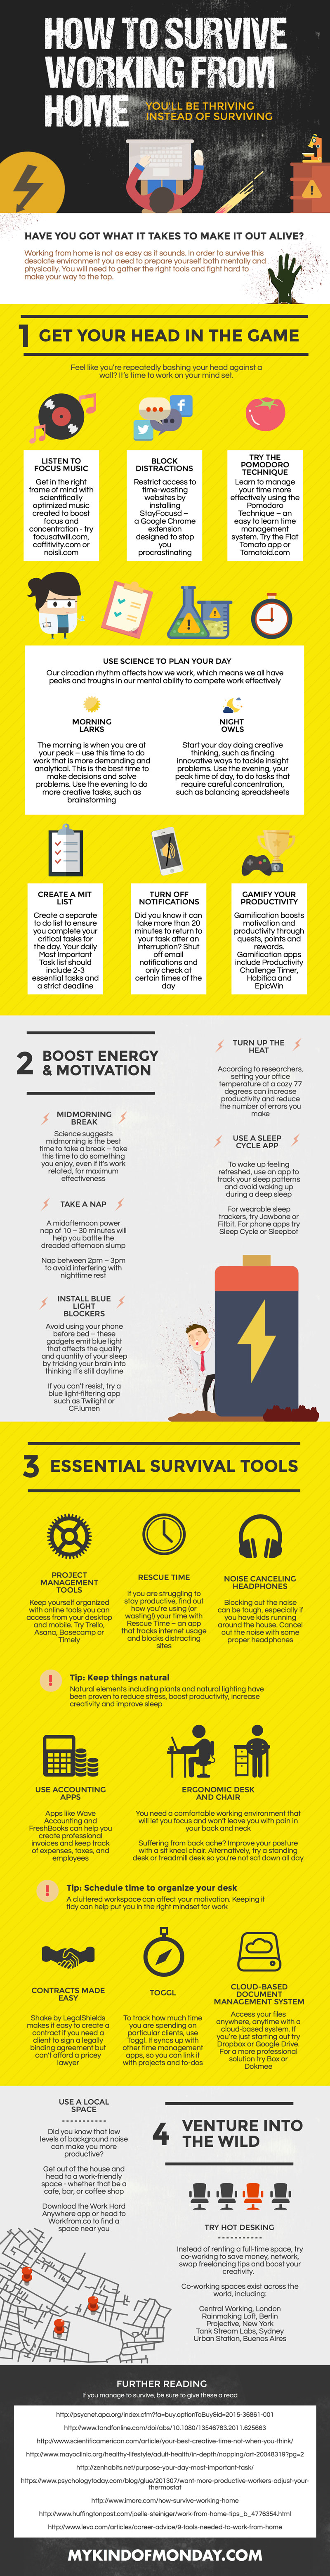 How to survive working from home infographic